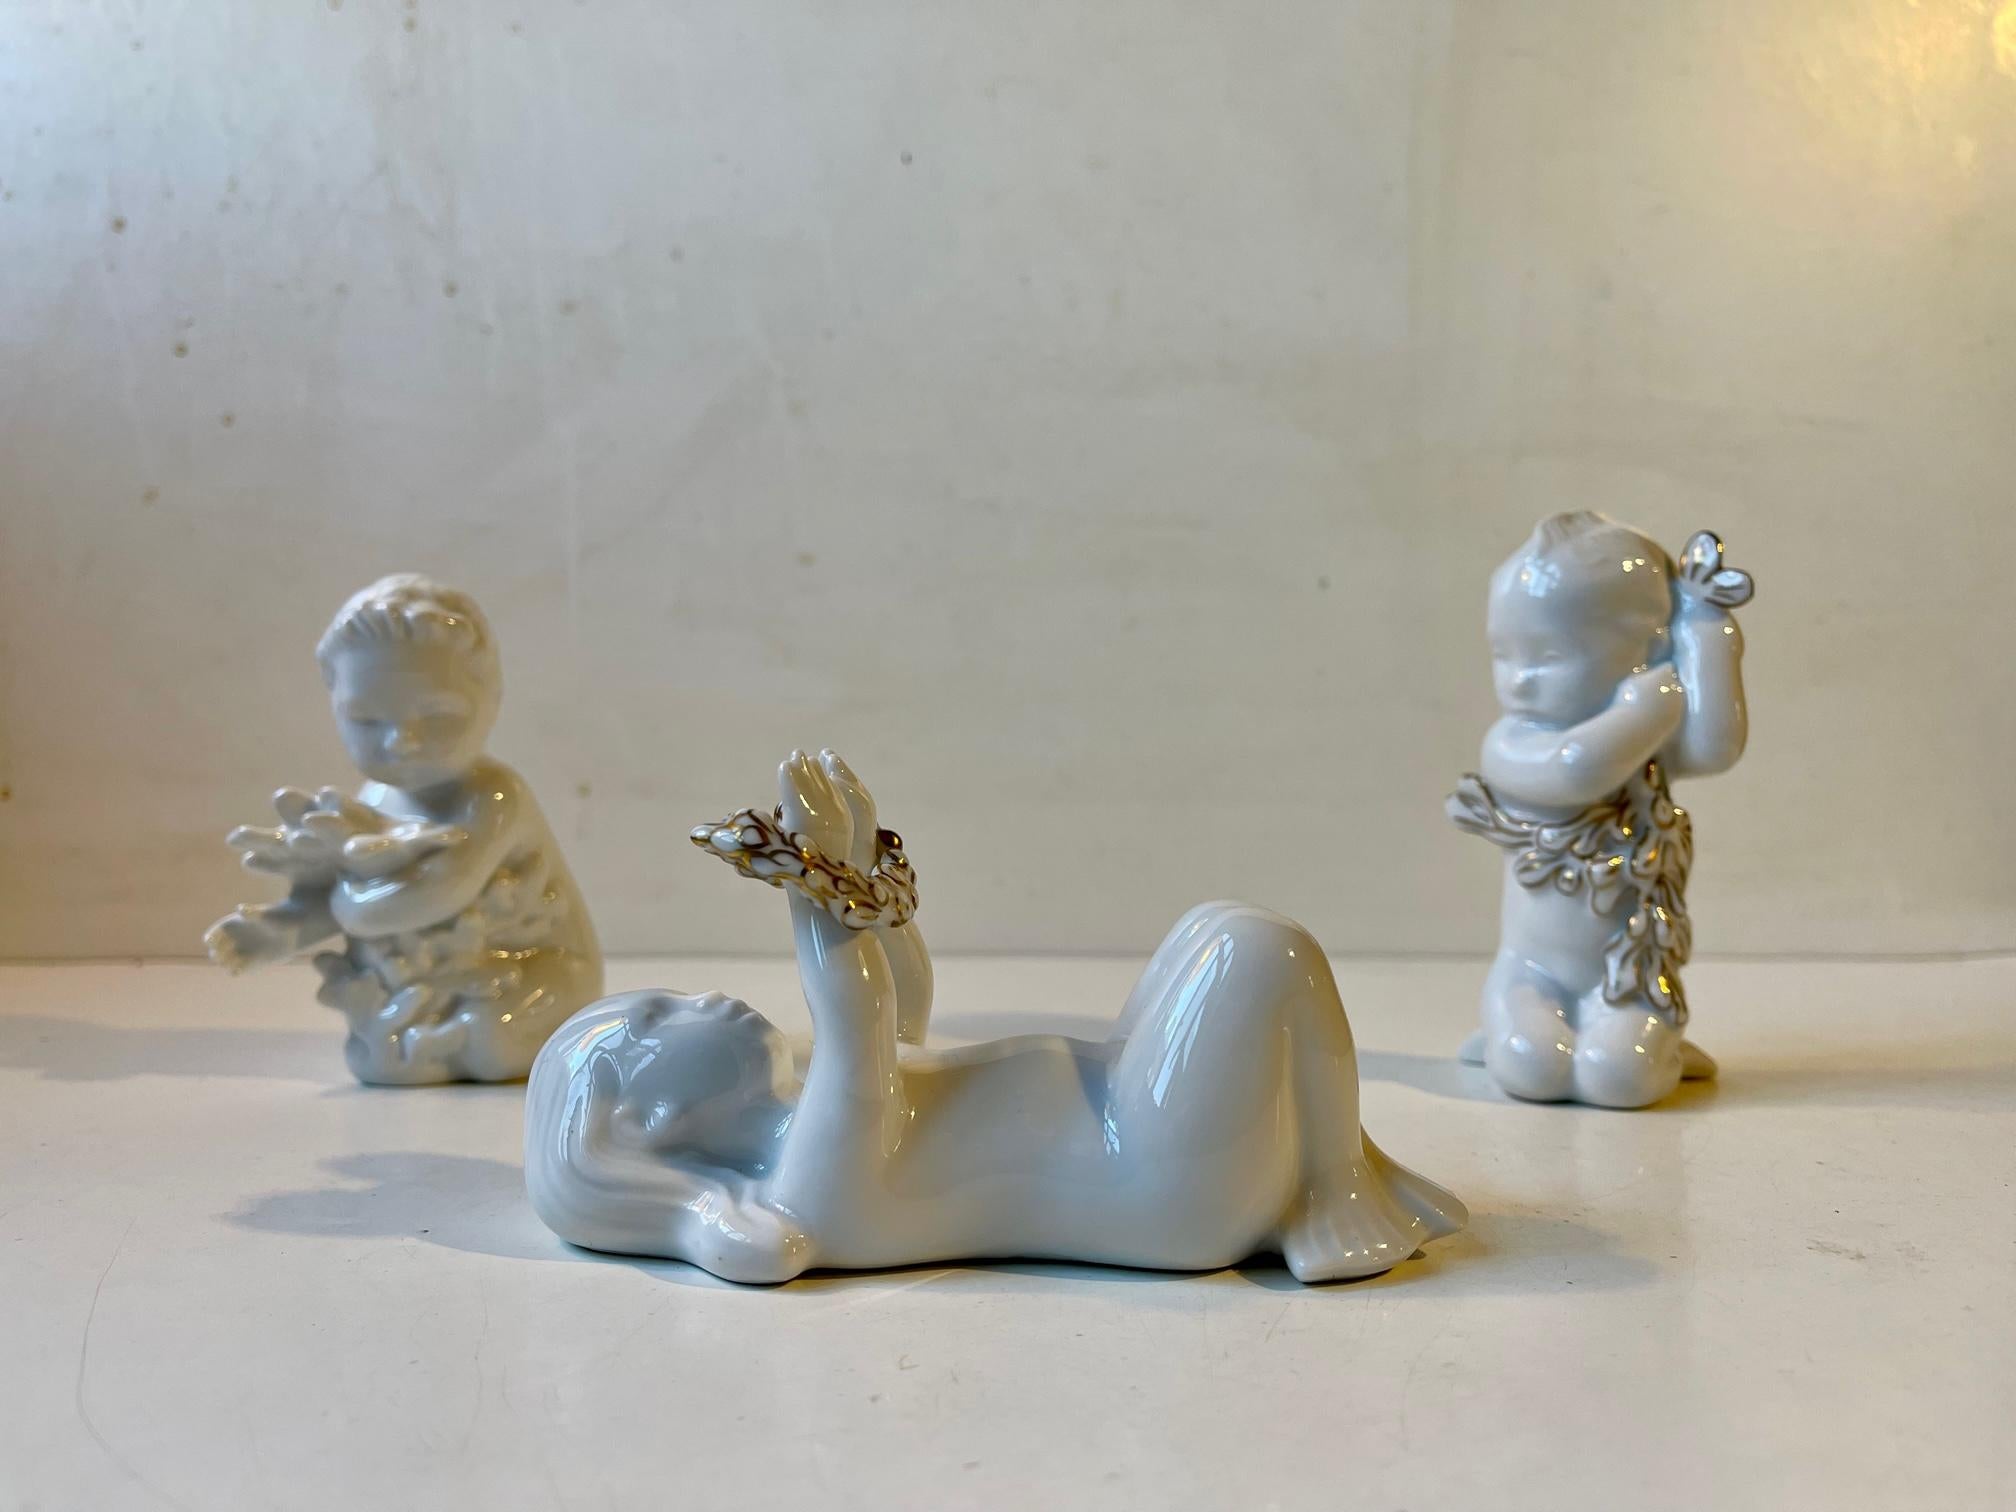 A group of the blanc de chine porcelain figurines two of which are special editions decorated with gold glaze. They are called oceans kids and they are perceived to be a mermaids offspring. Designed by Ebbe Sadolin and Svend Jespersen and